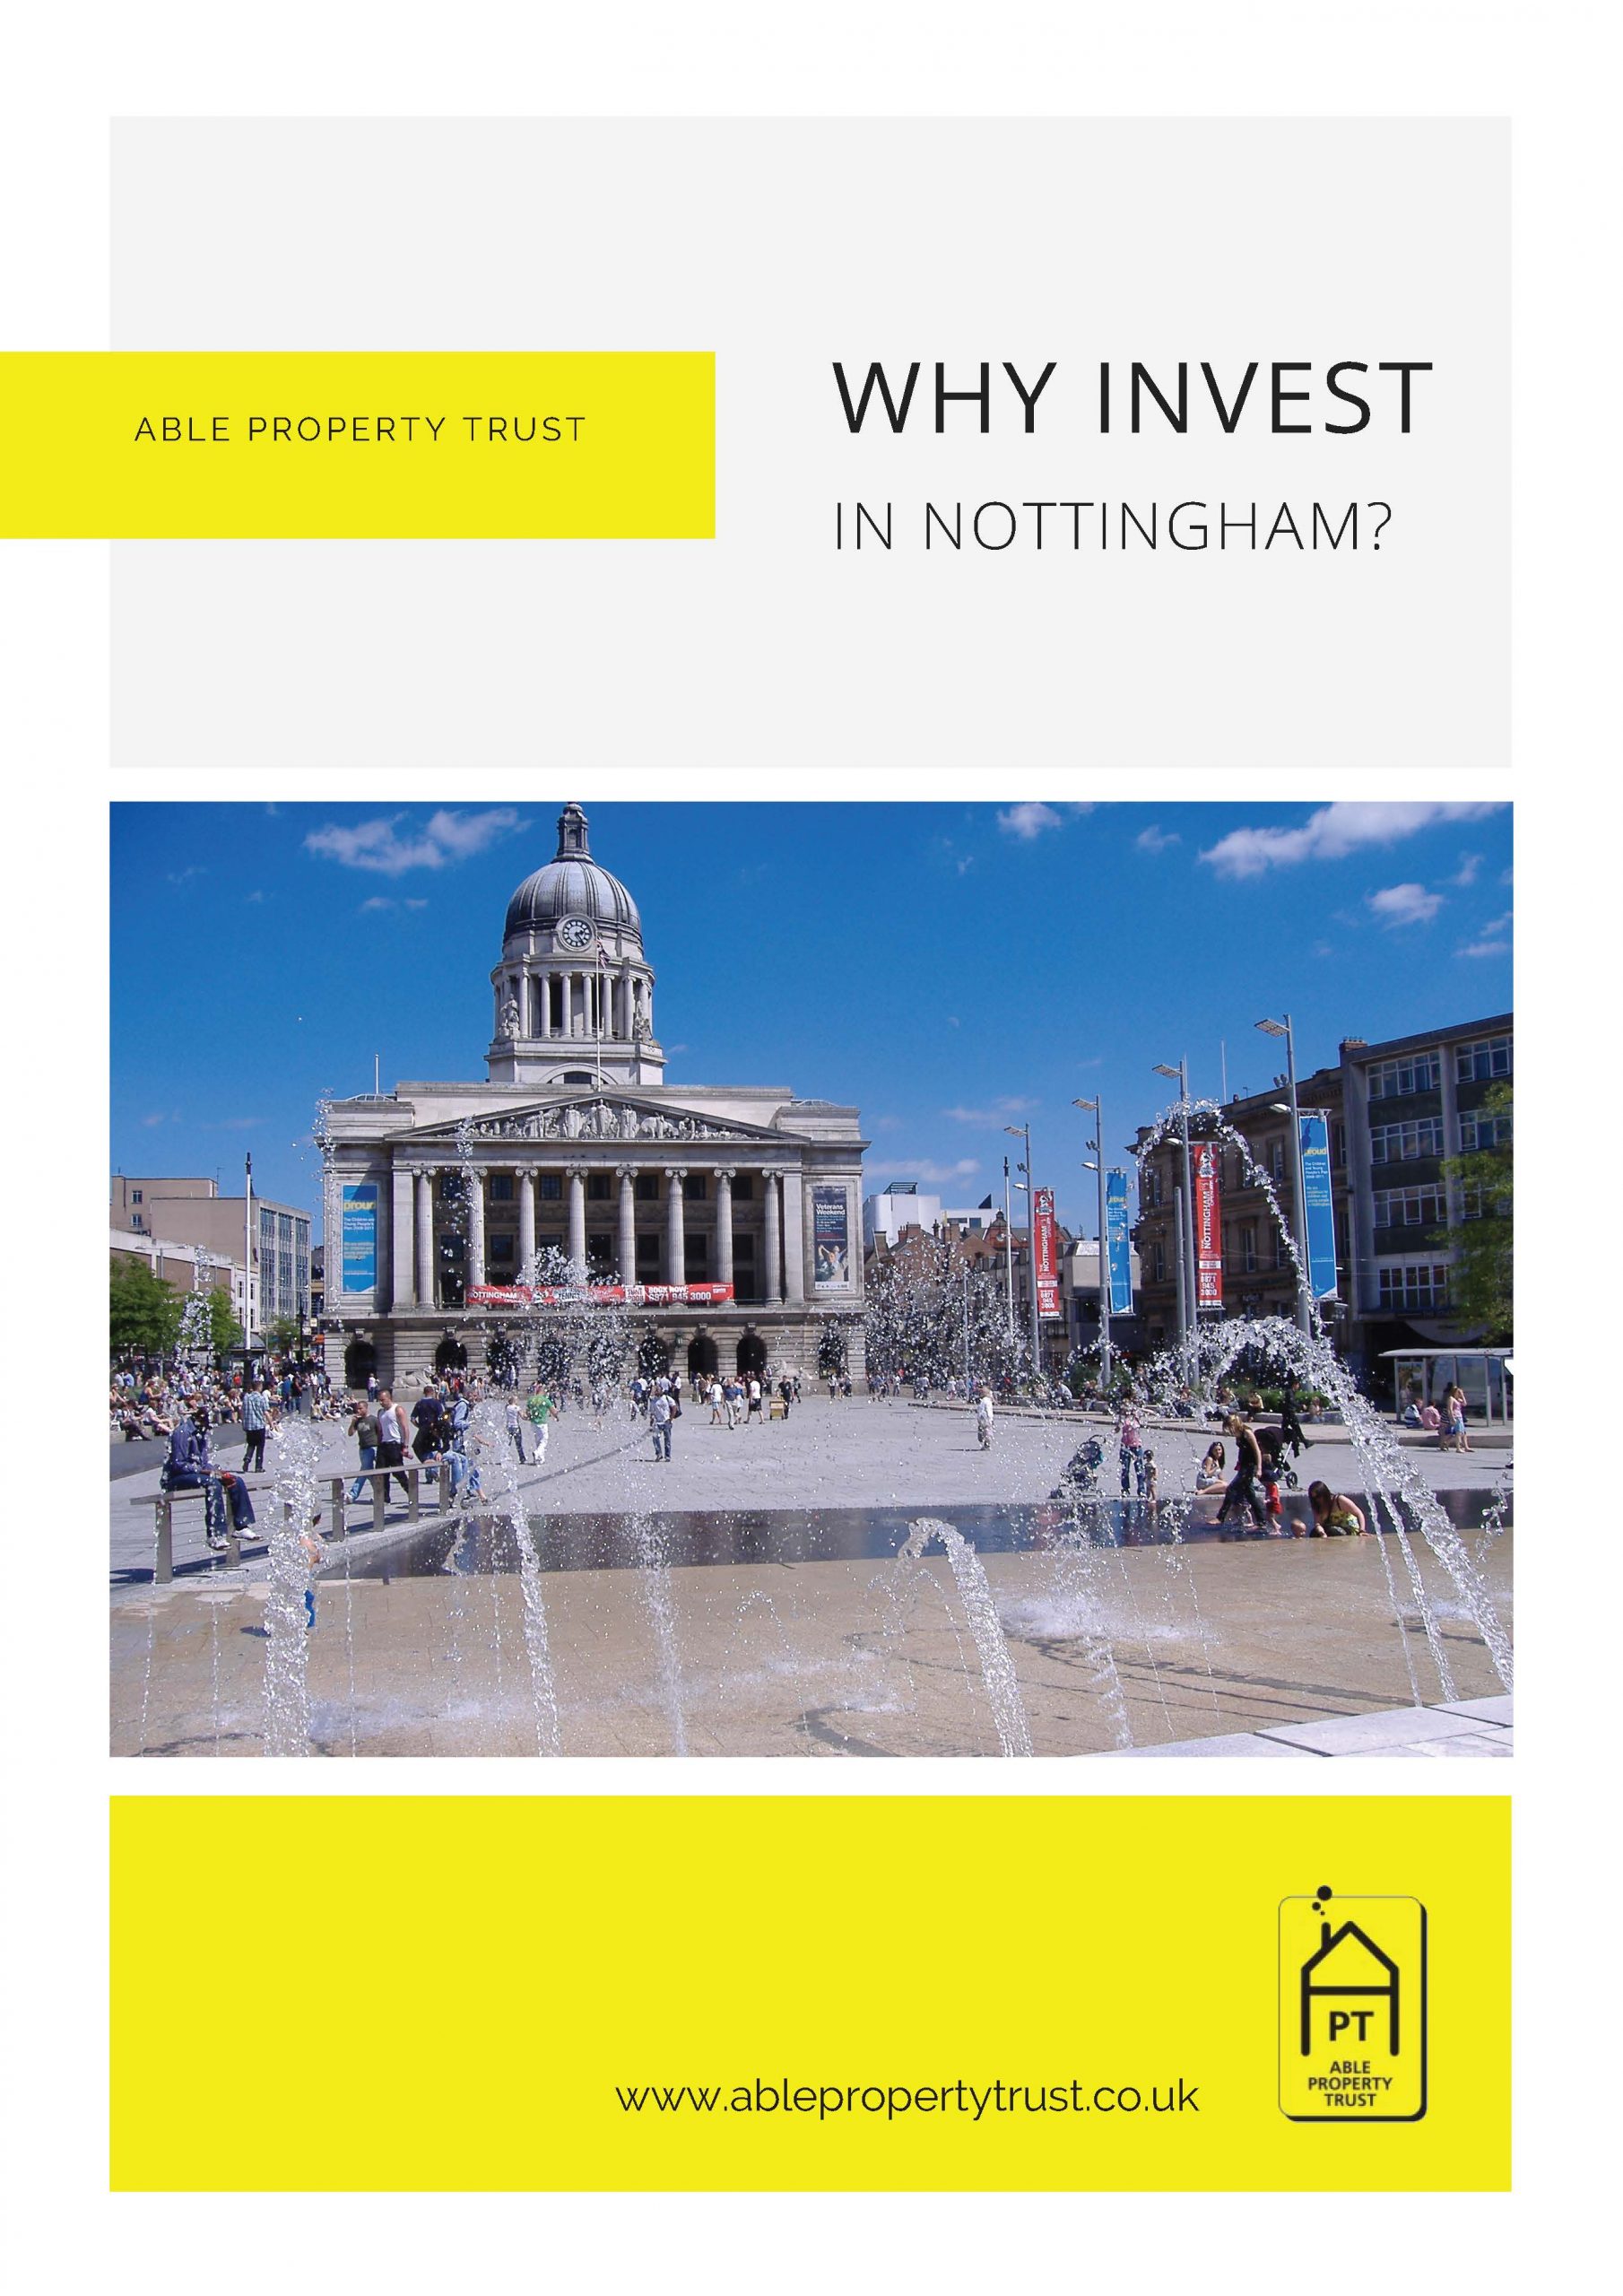 Able Property Trust Nottingham property investment brochure front cover